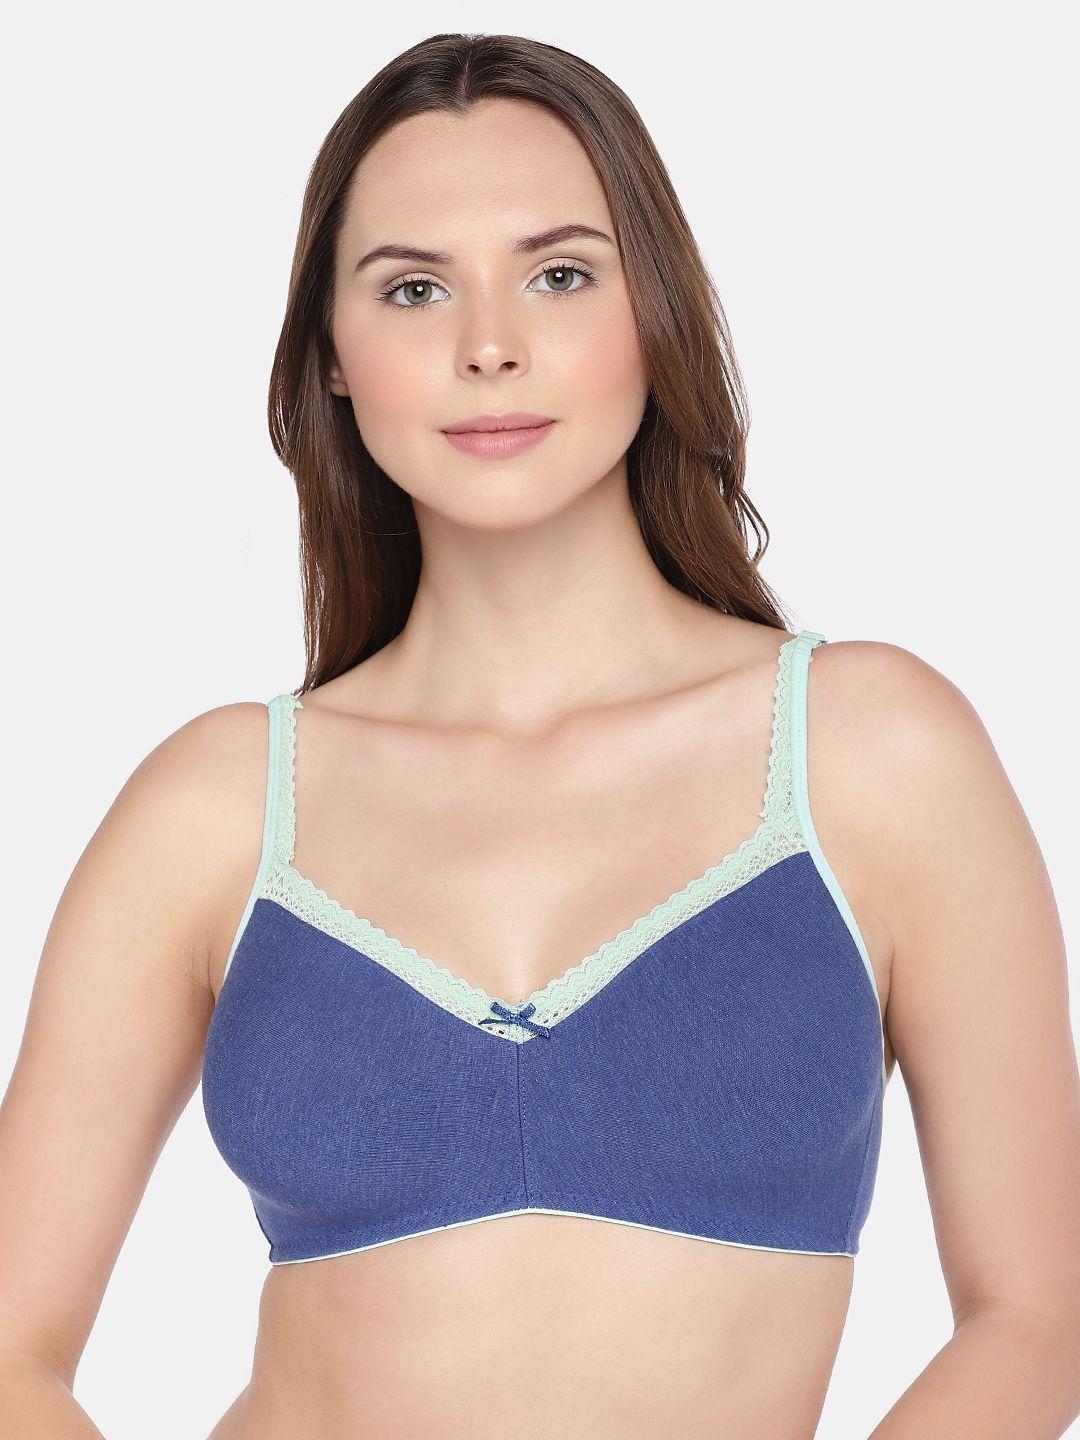 Inner Sense Organic Cotton Antimicrobial Sustainable Soft Laced Bra (Royal Blue) ISB017A